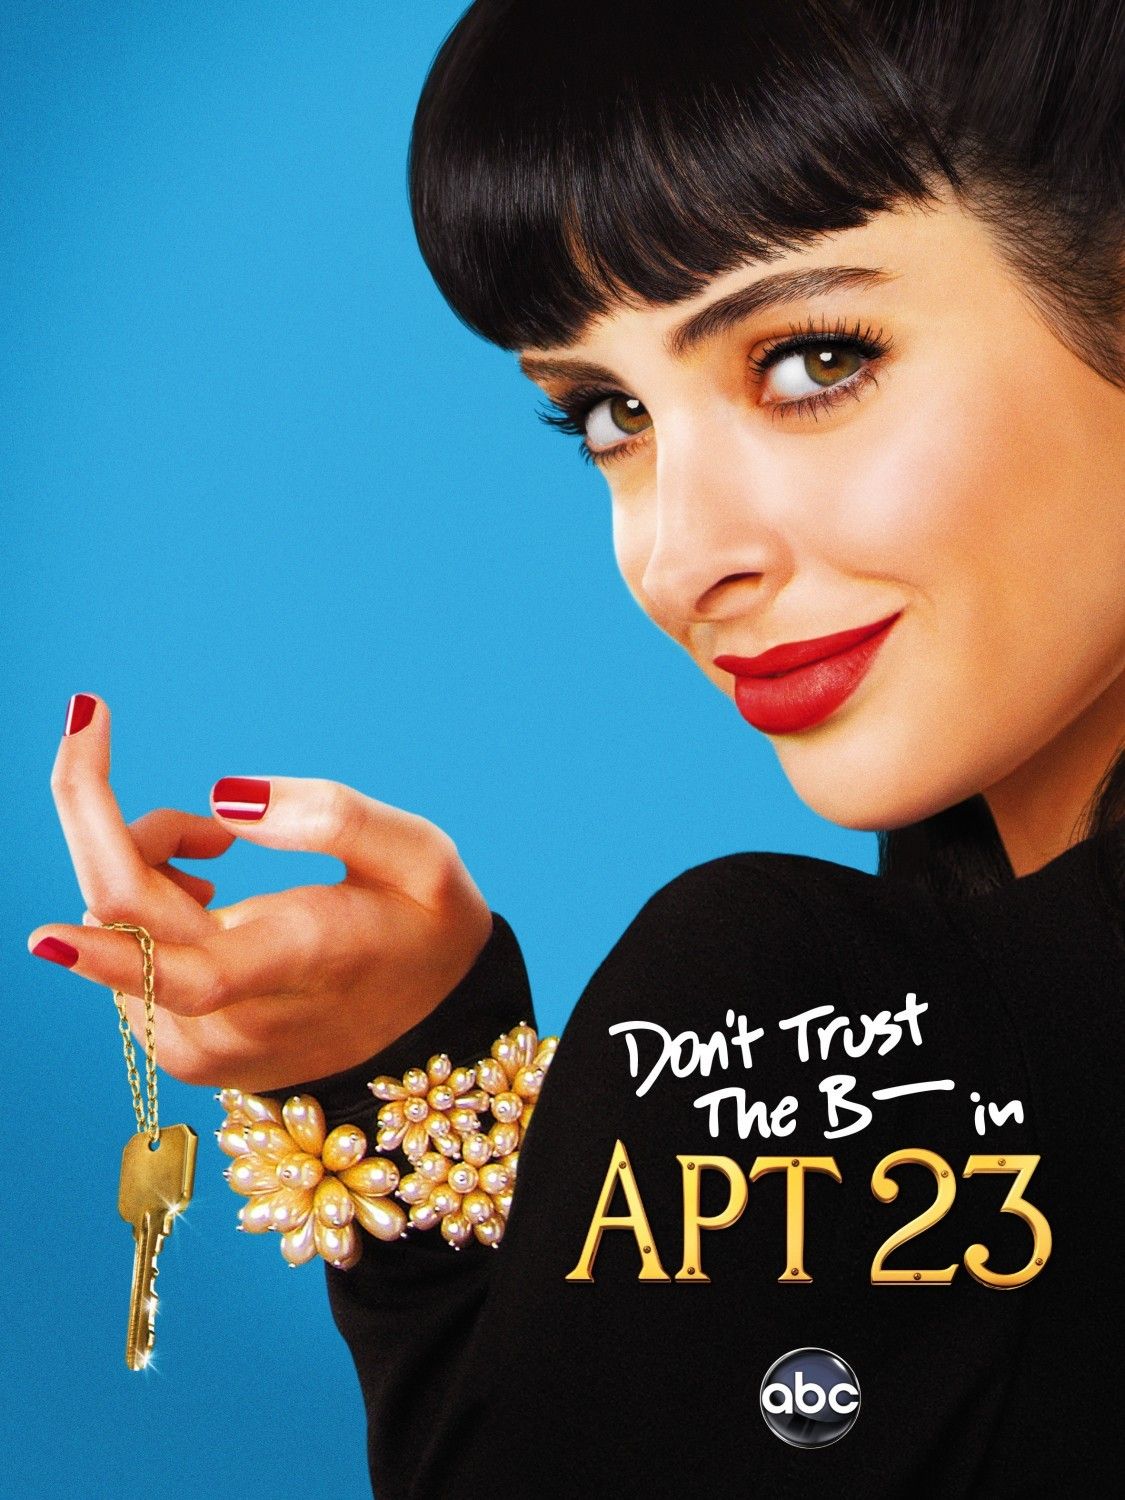 Don't Trust The B---- In Apartment 23 TV Show Poster